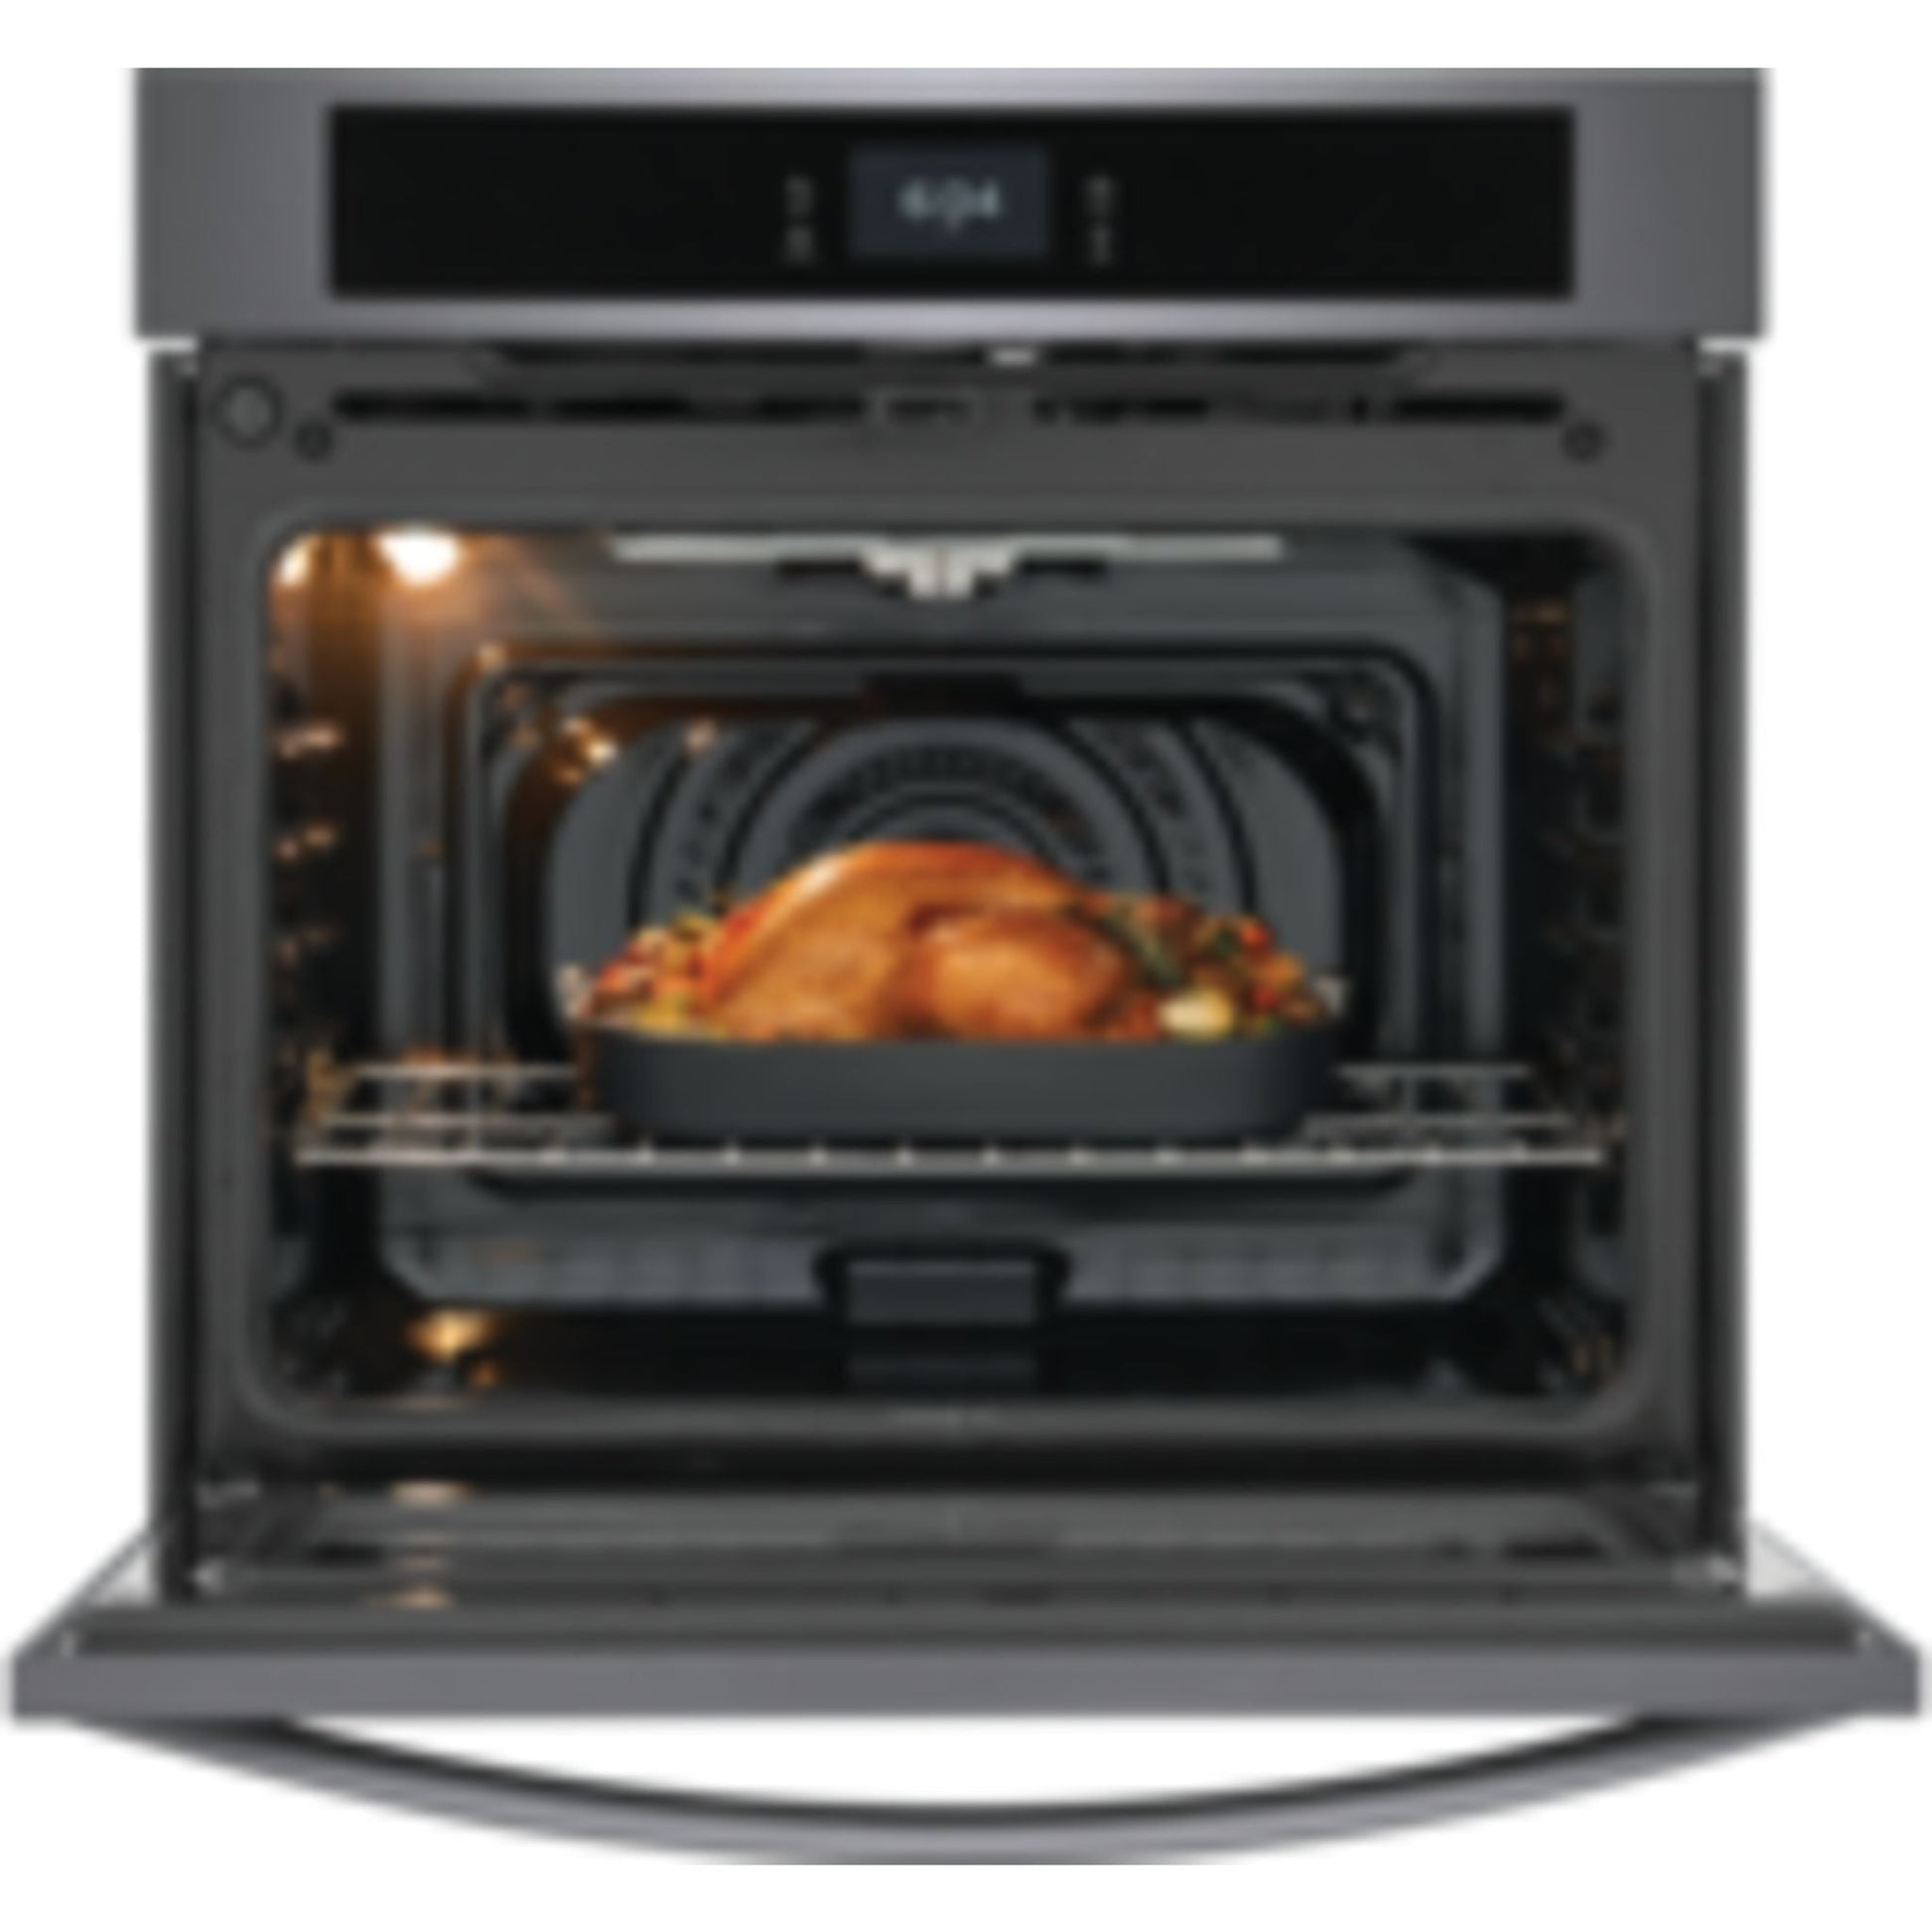 Frigidaire 30" Convection Wall Oven (FCWS3027AD) - Black Stainless